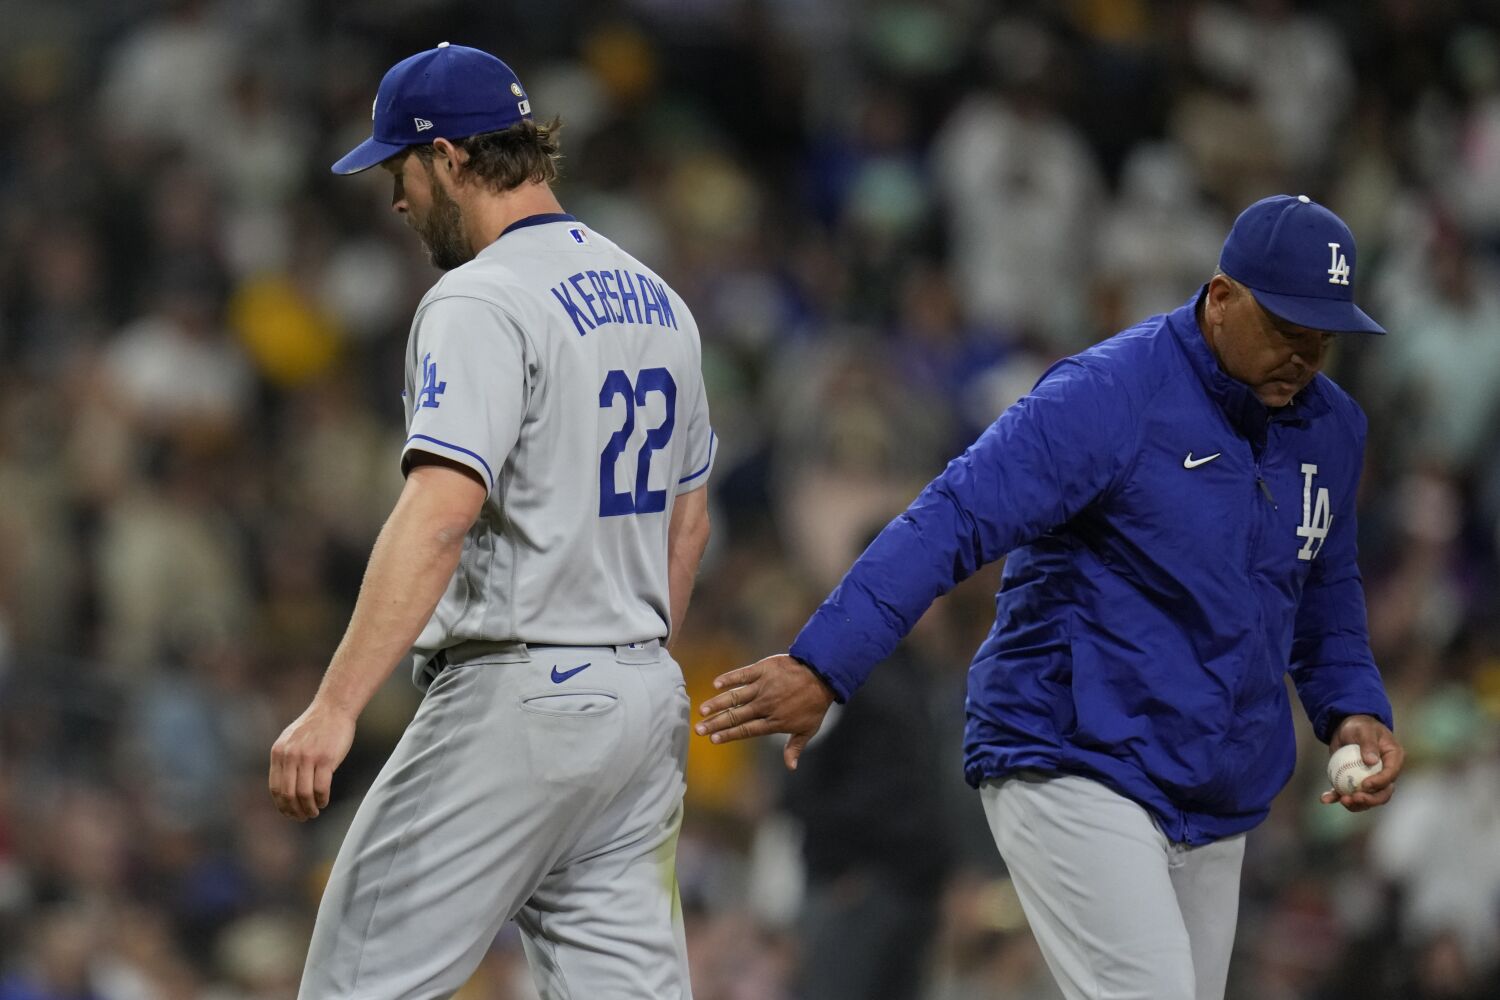 Different stakes, same result: Dodgers lose again to playoff-nemesis Padres